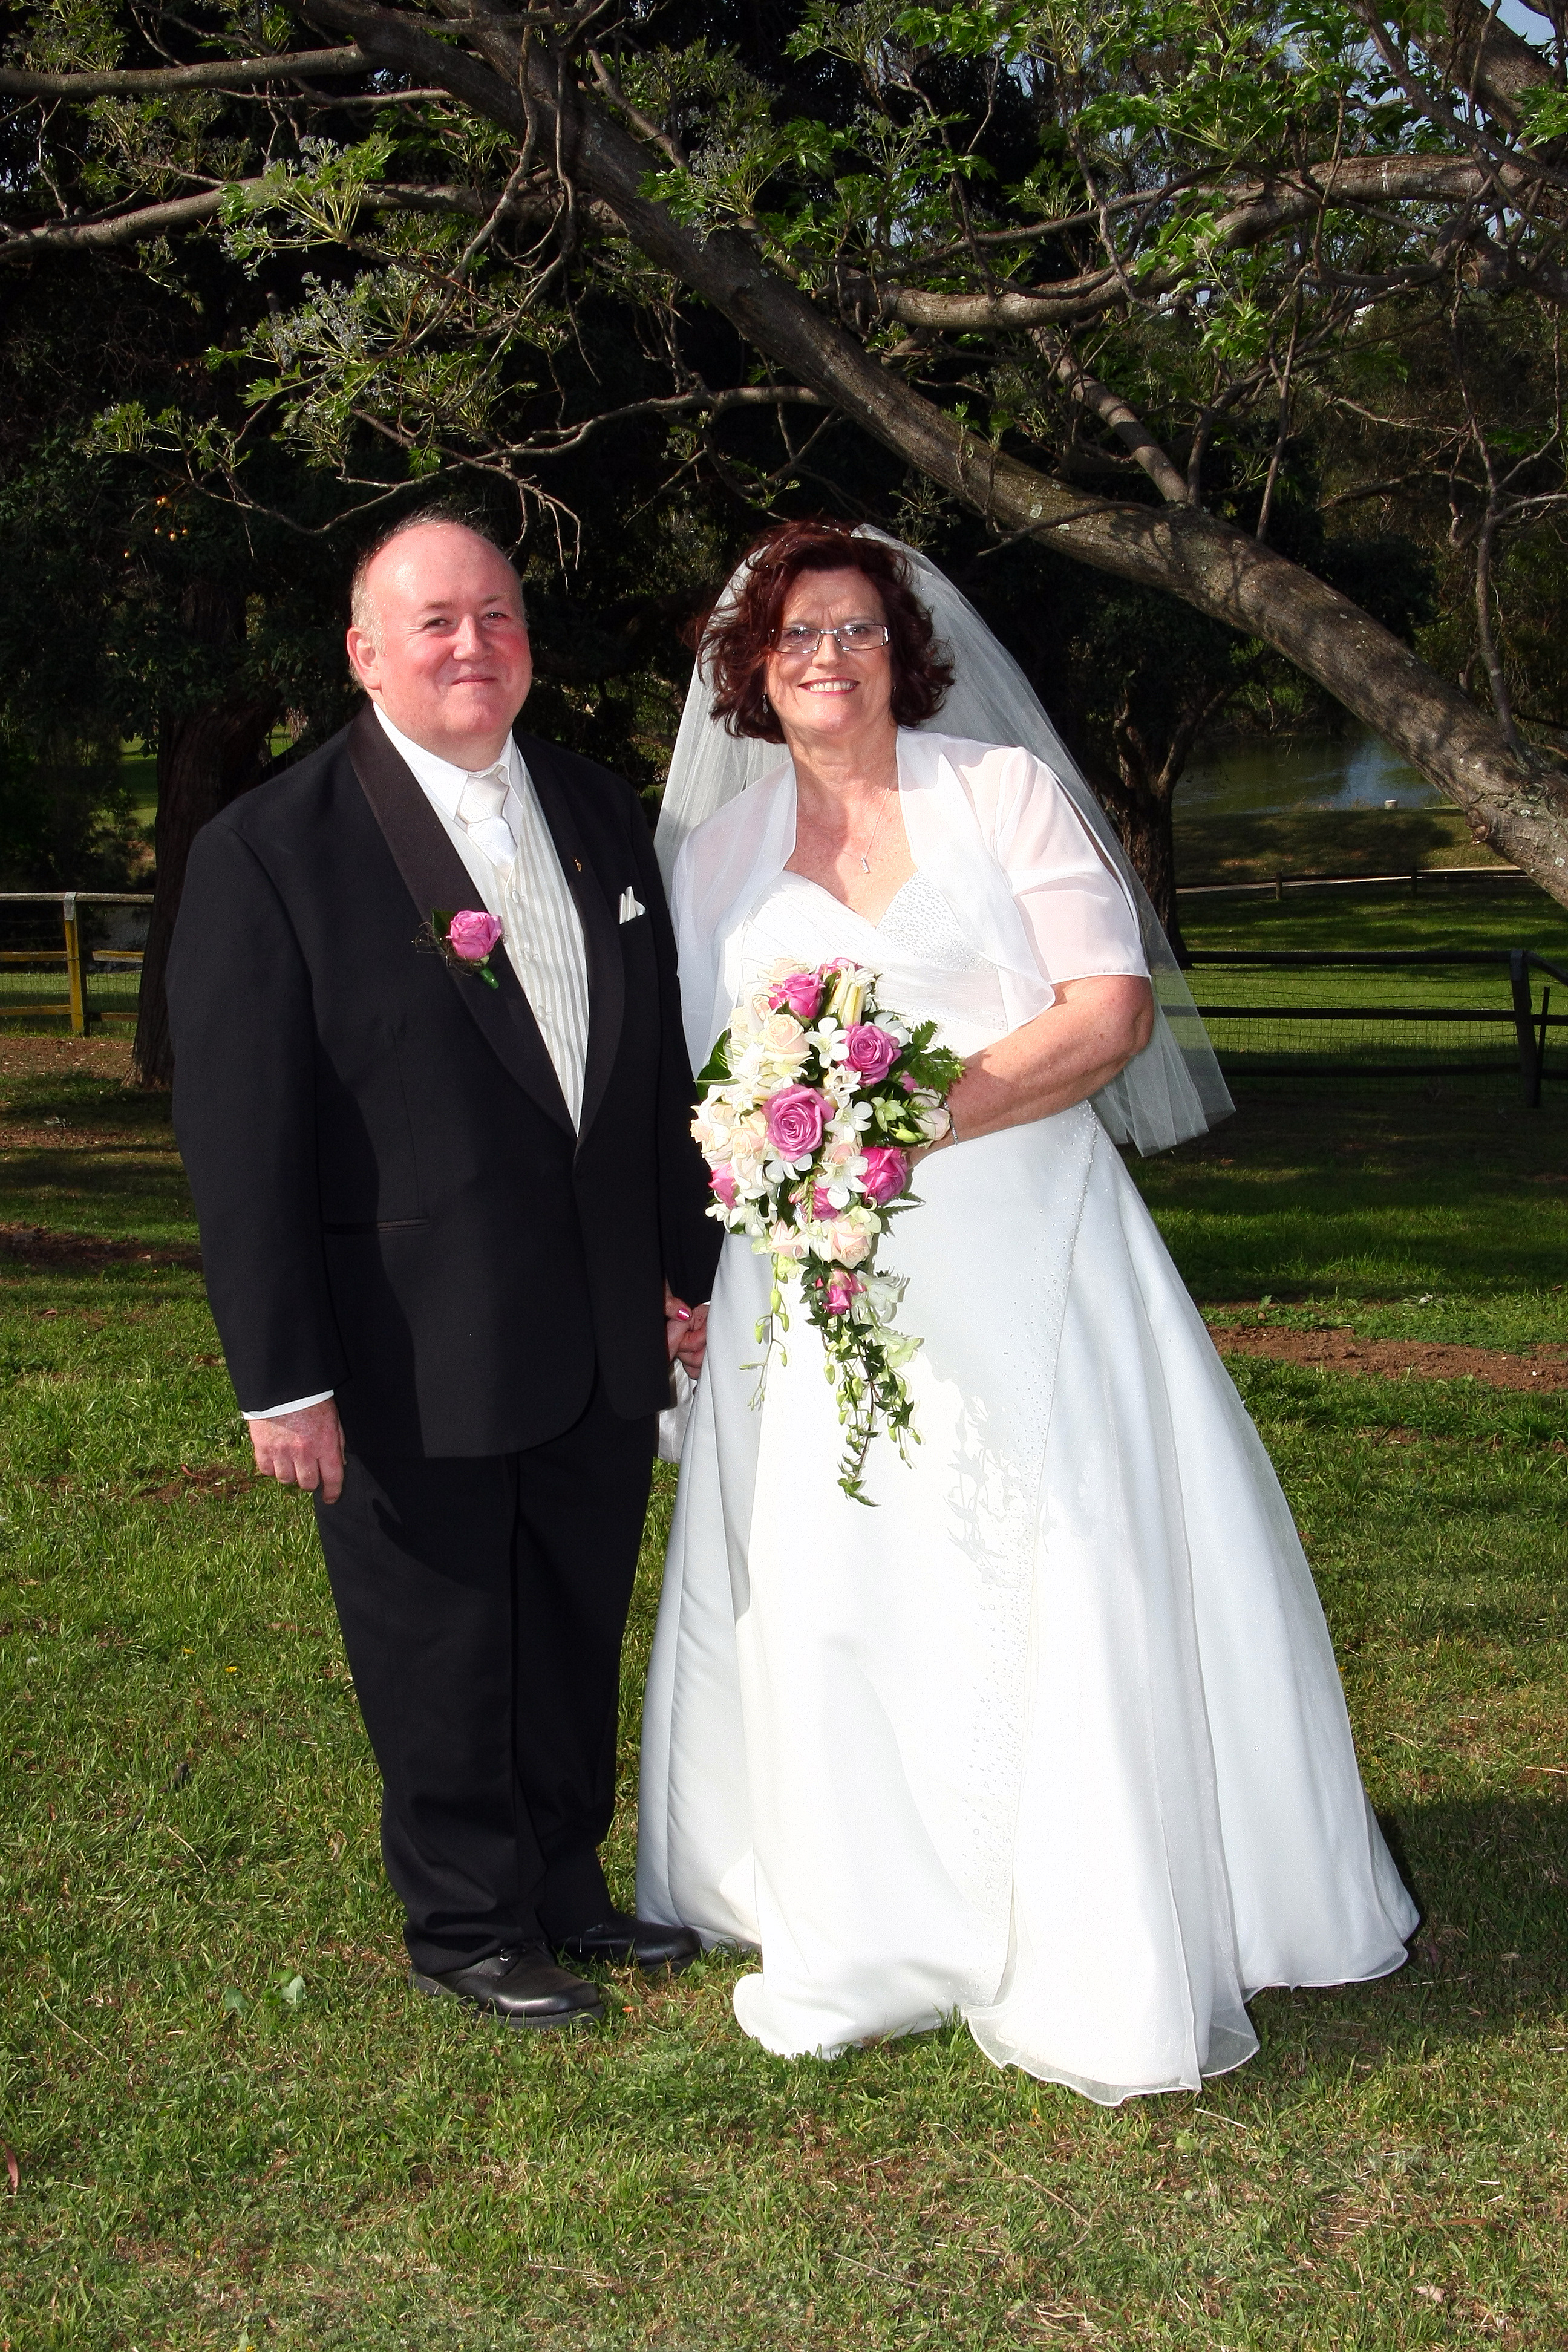 Paul Kennedy and wife Denise Behringer on their wedding day, 26 September 2010